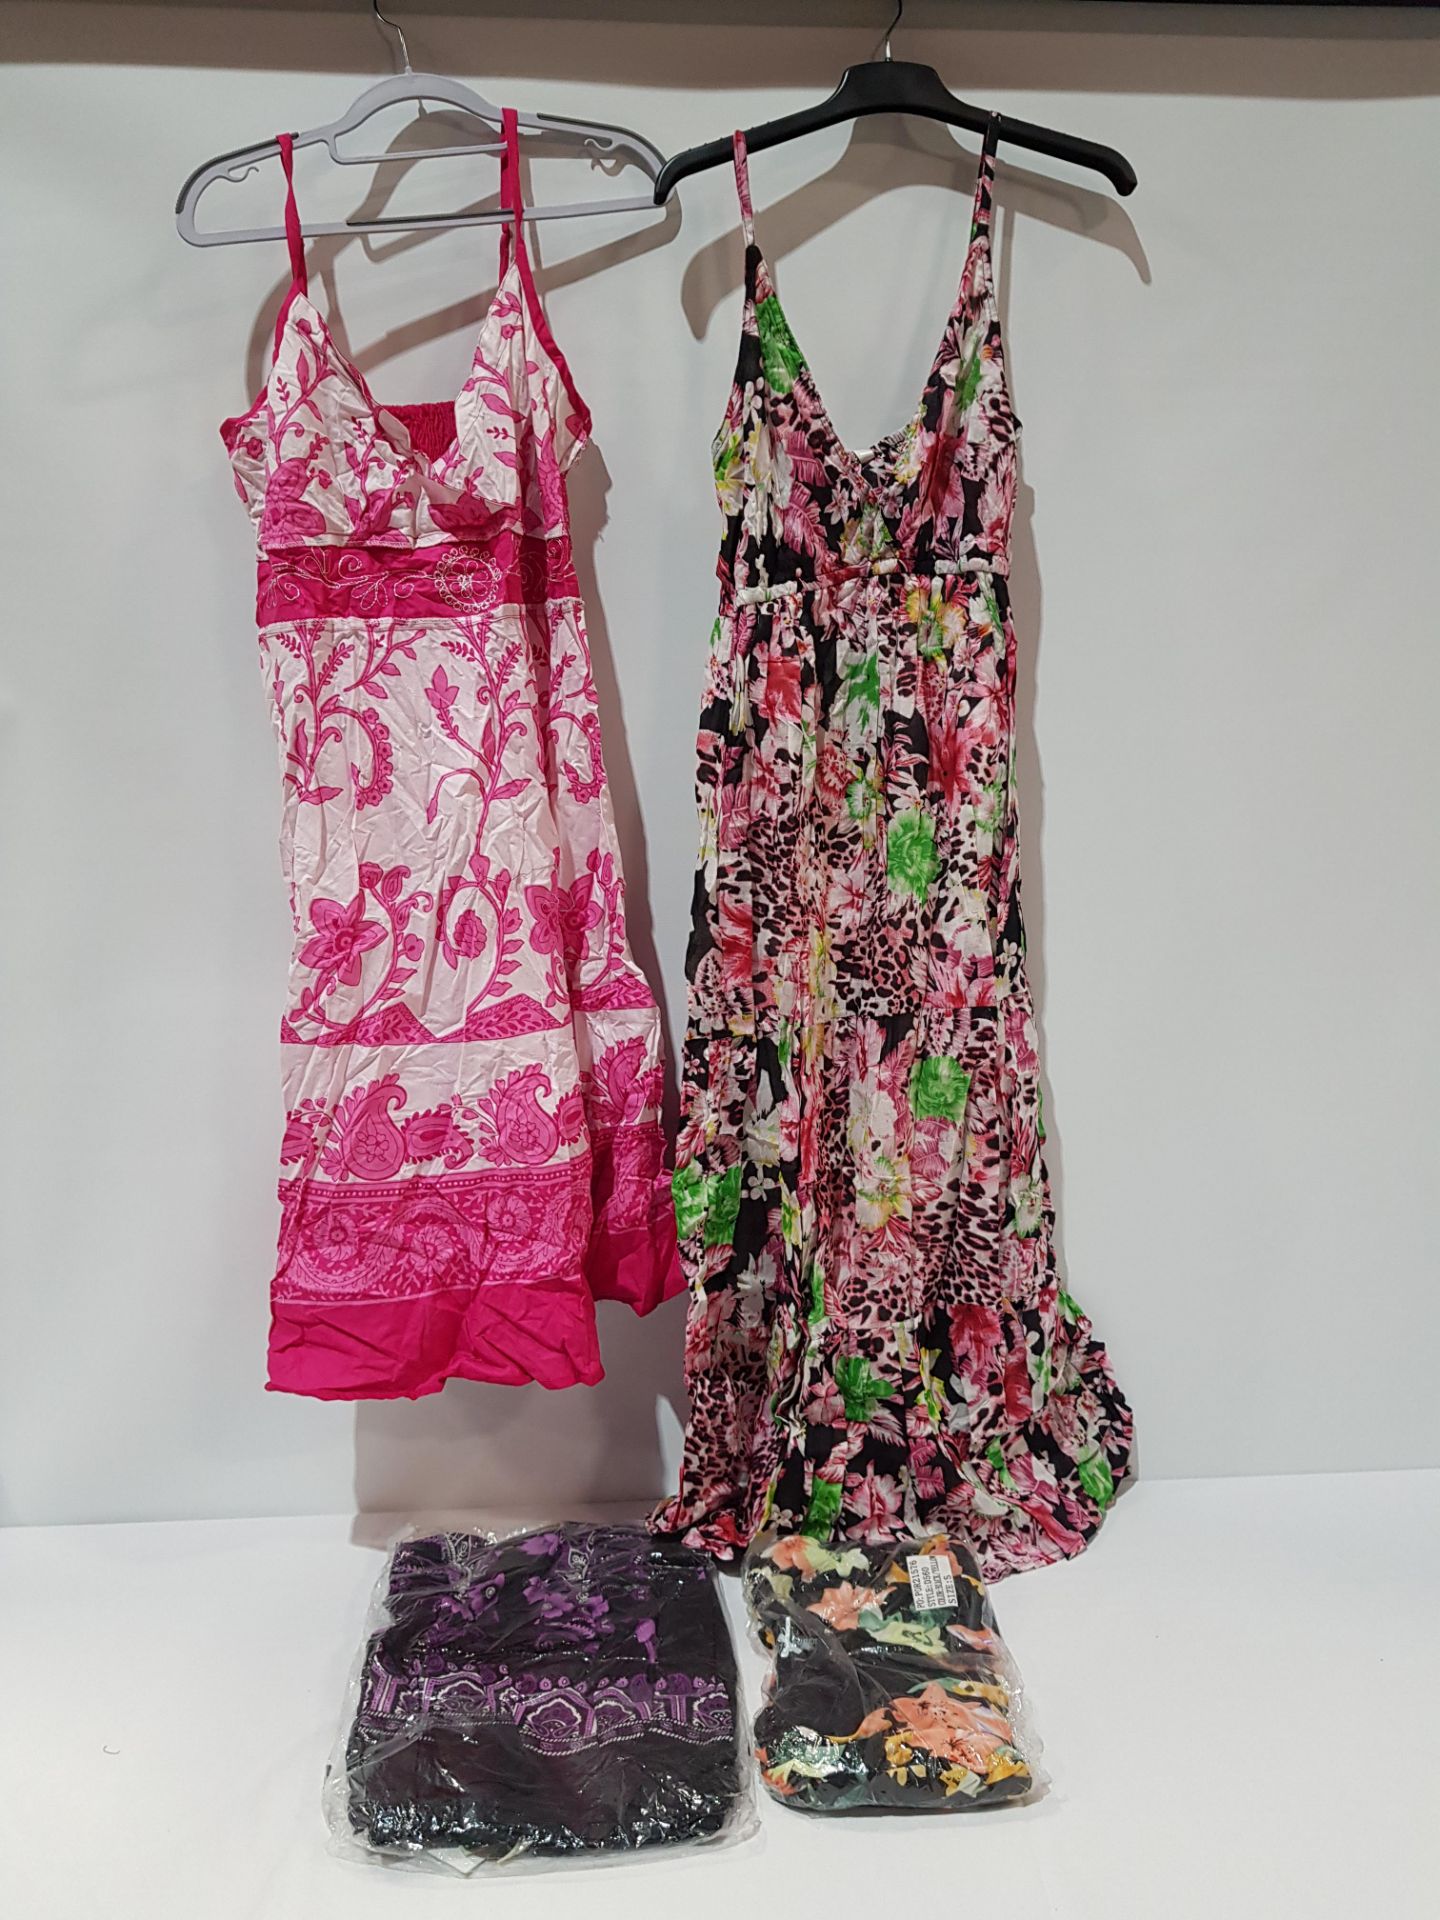 24 X BRAND NEW MIXED STYLE PISTACHIO DRESSES/ SKIRTS IN MIXED DESIGNS AND SIZES( RRP £25 EACH- TOTAL